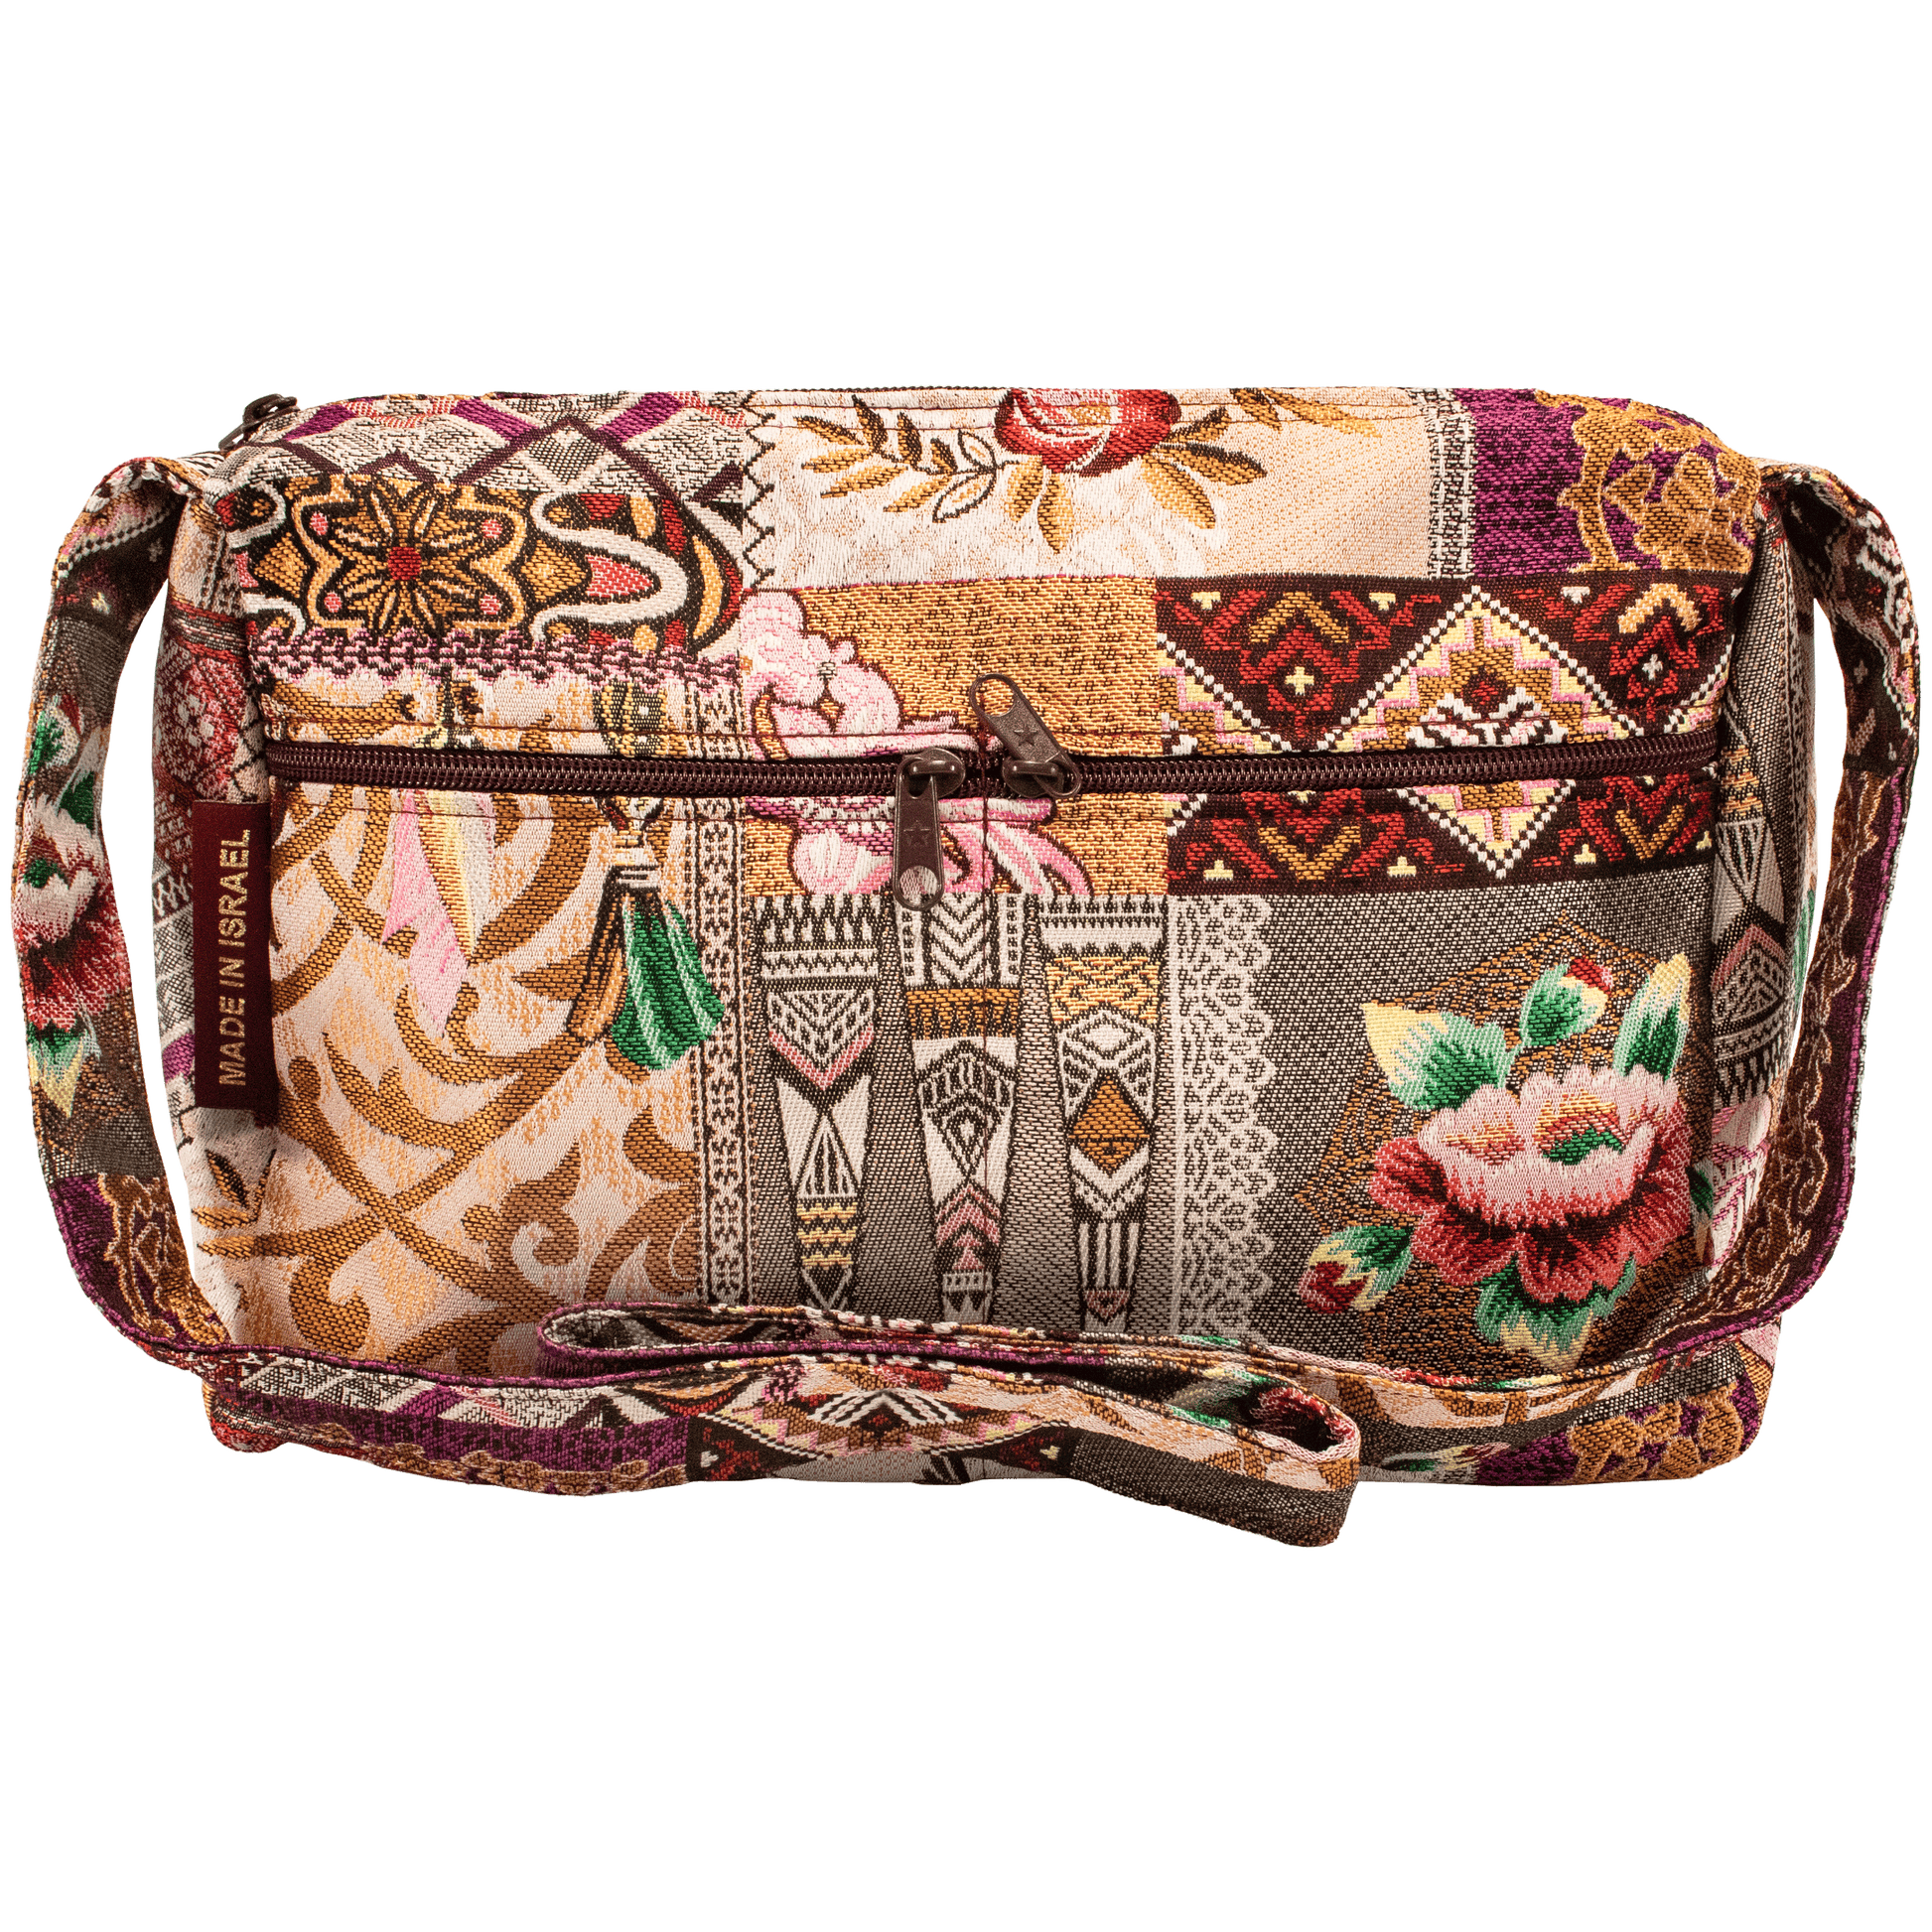 Large crossbody shoulder bag with floral and tribal pattern patchwork